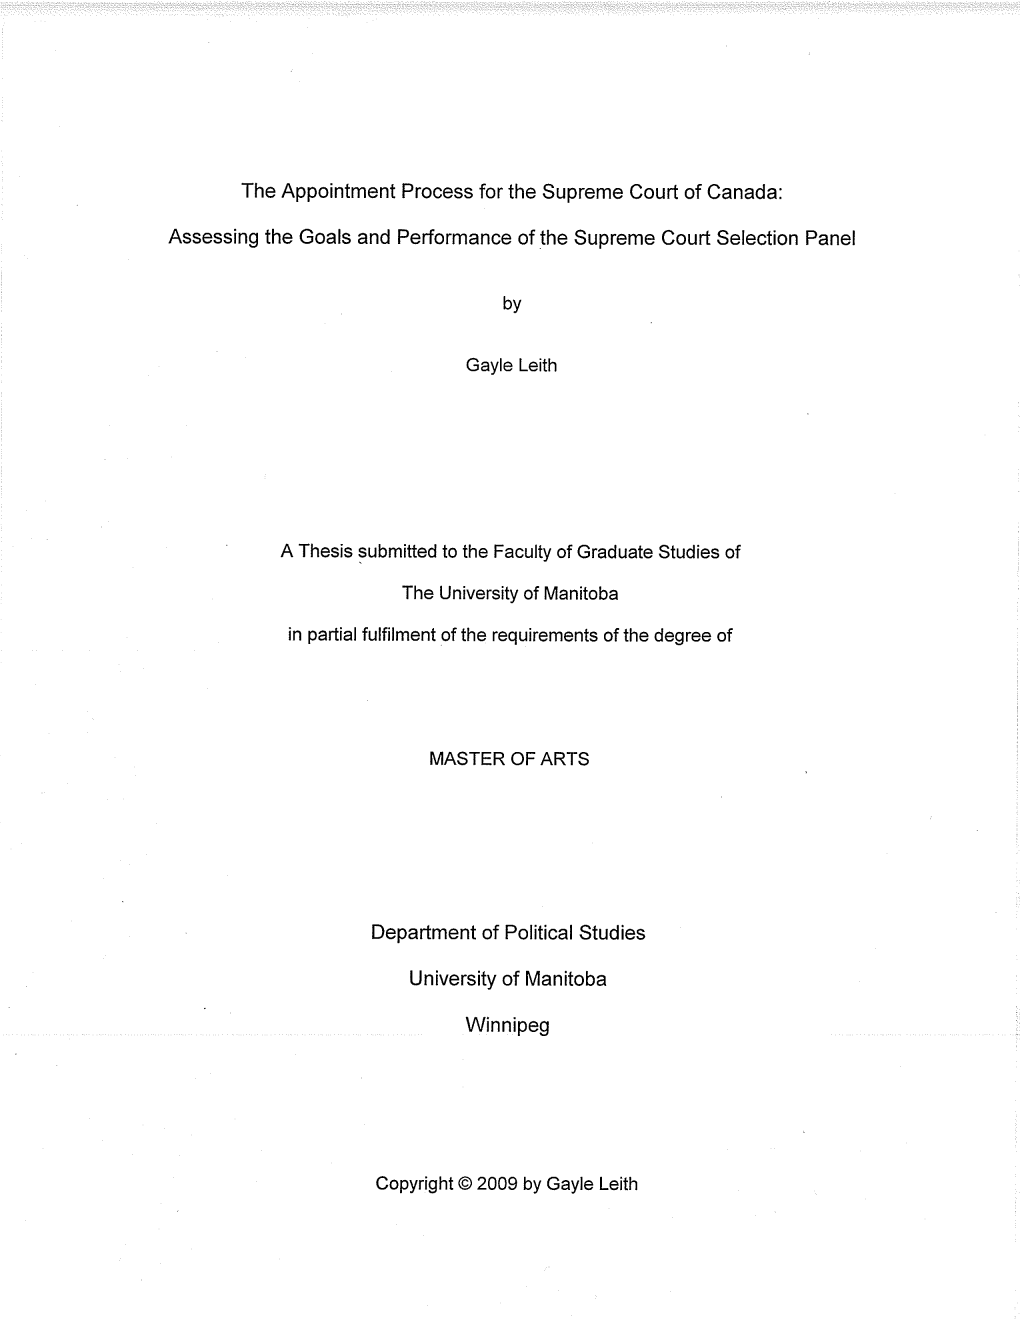 The Appointment Process for the Supreme Court of Canada